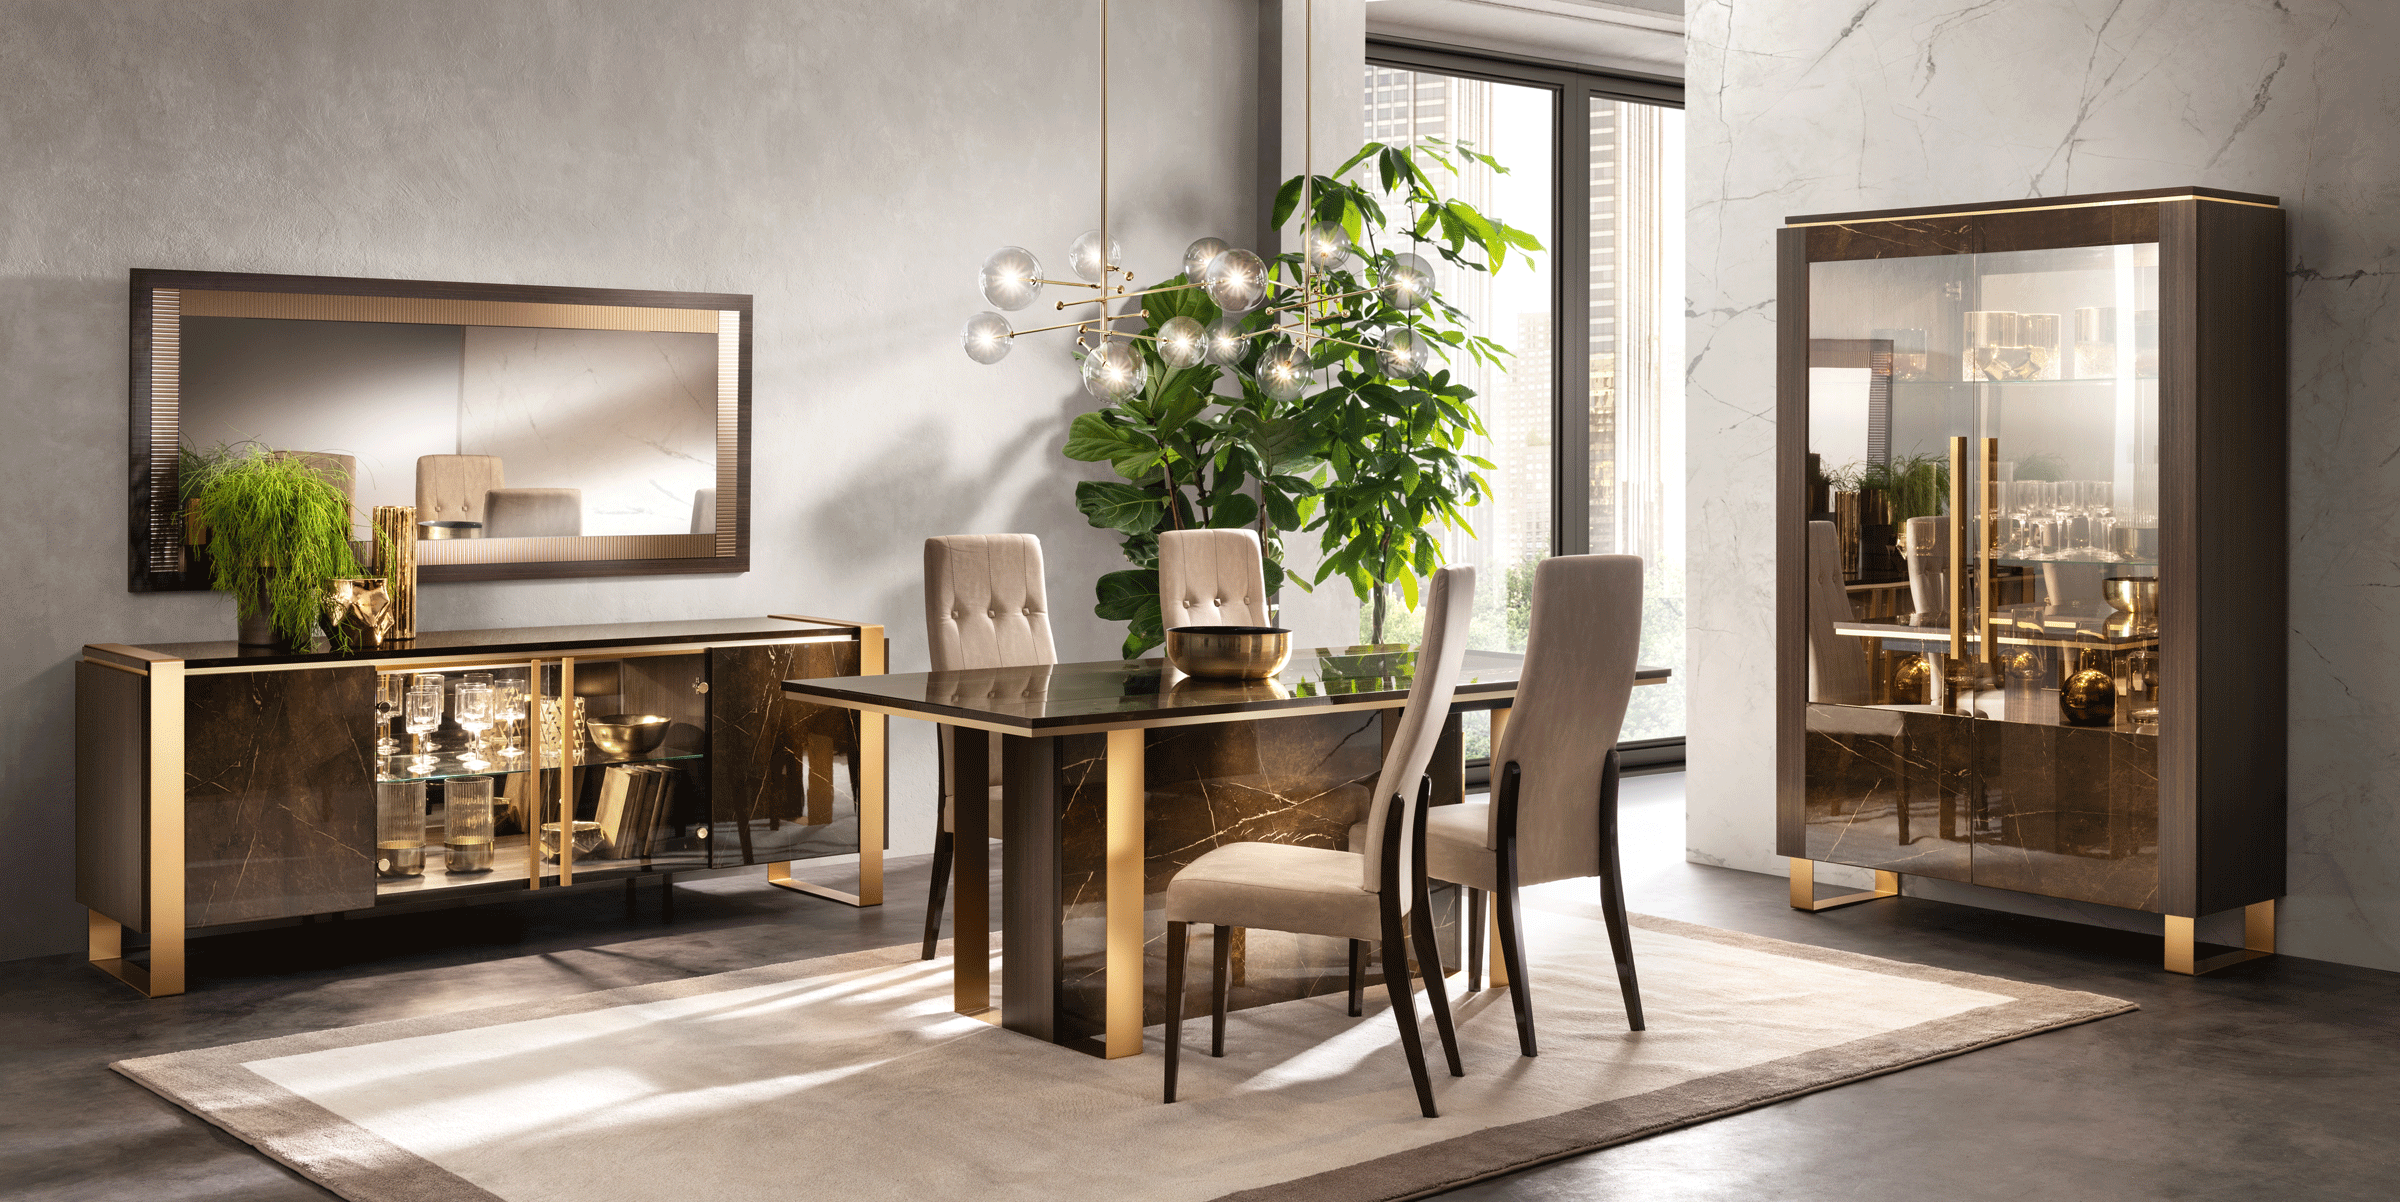 Dining Room Furniture Classic Dining Room Sets Essenza Dining by Arredoclassic, Italy Additional